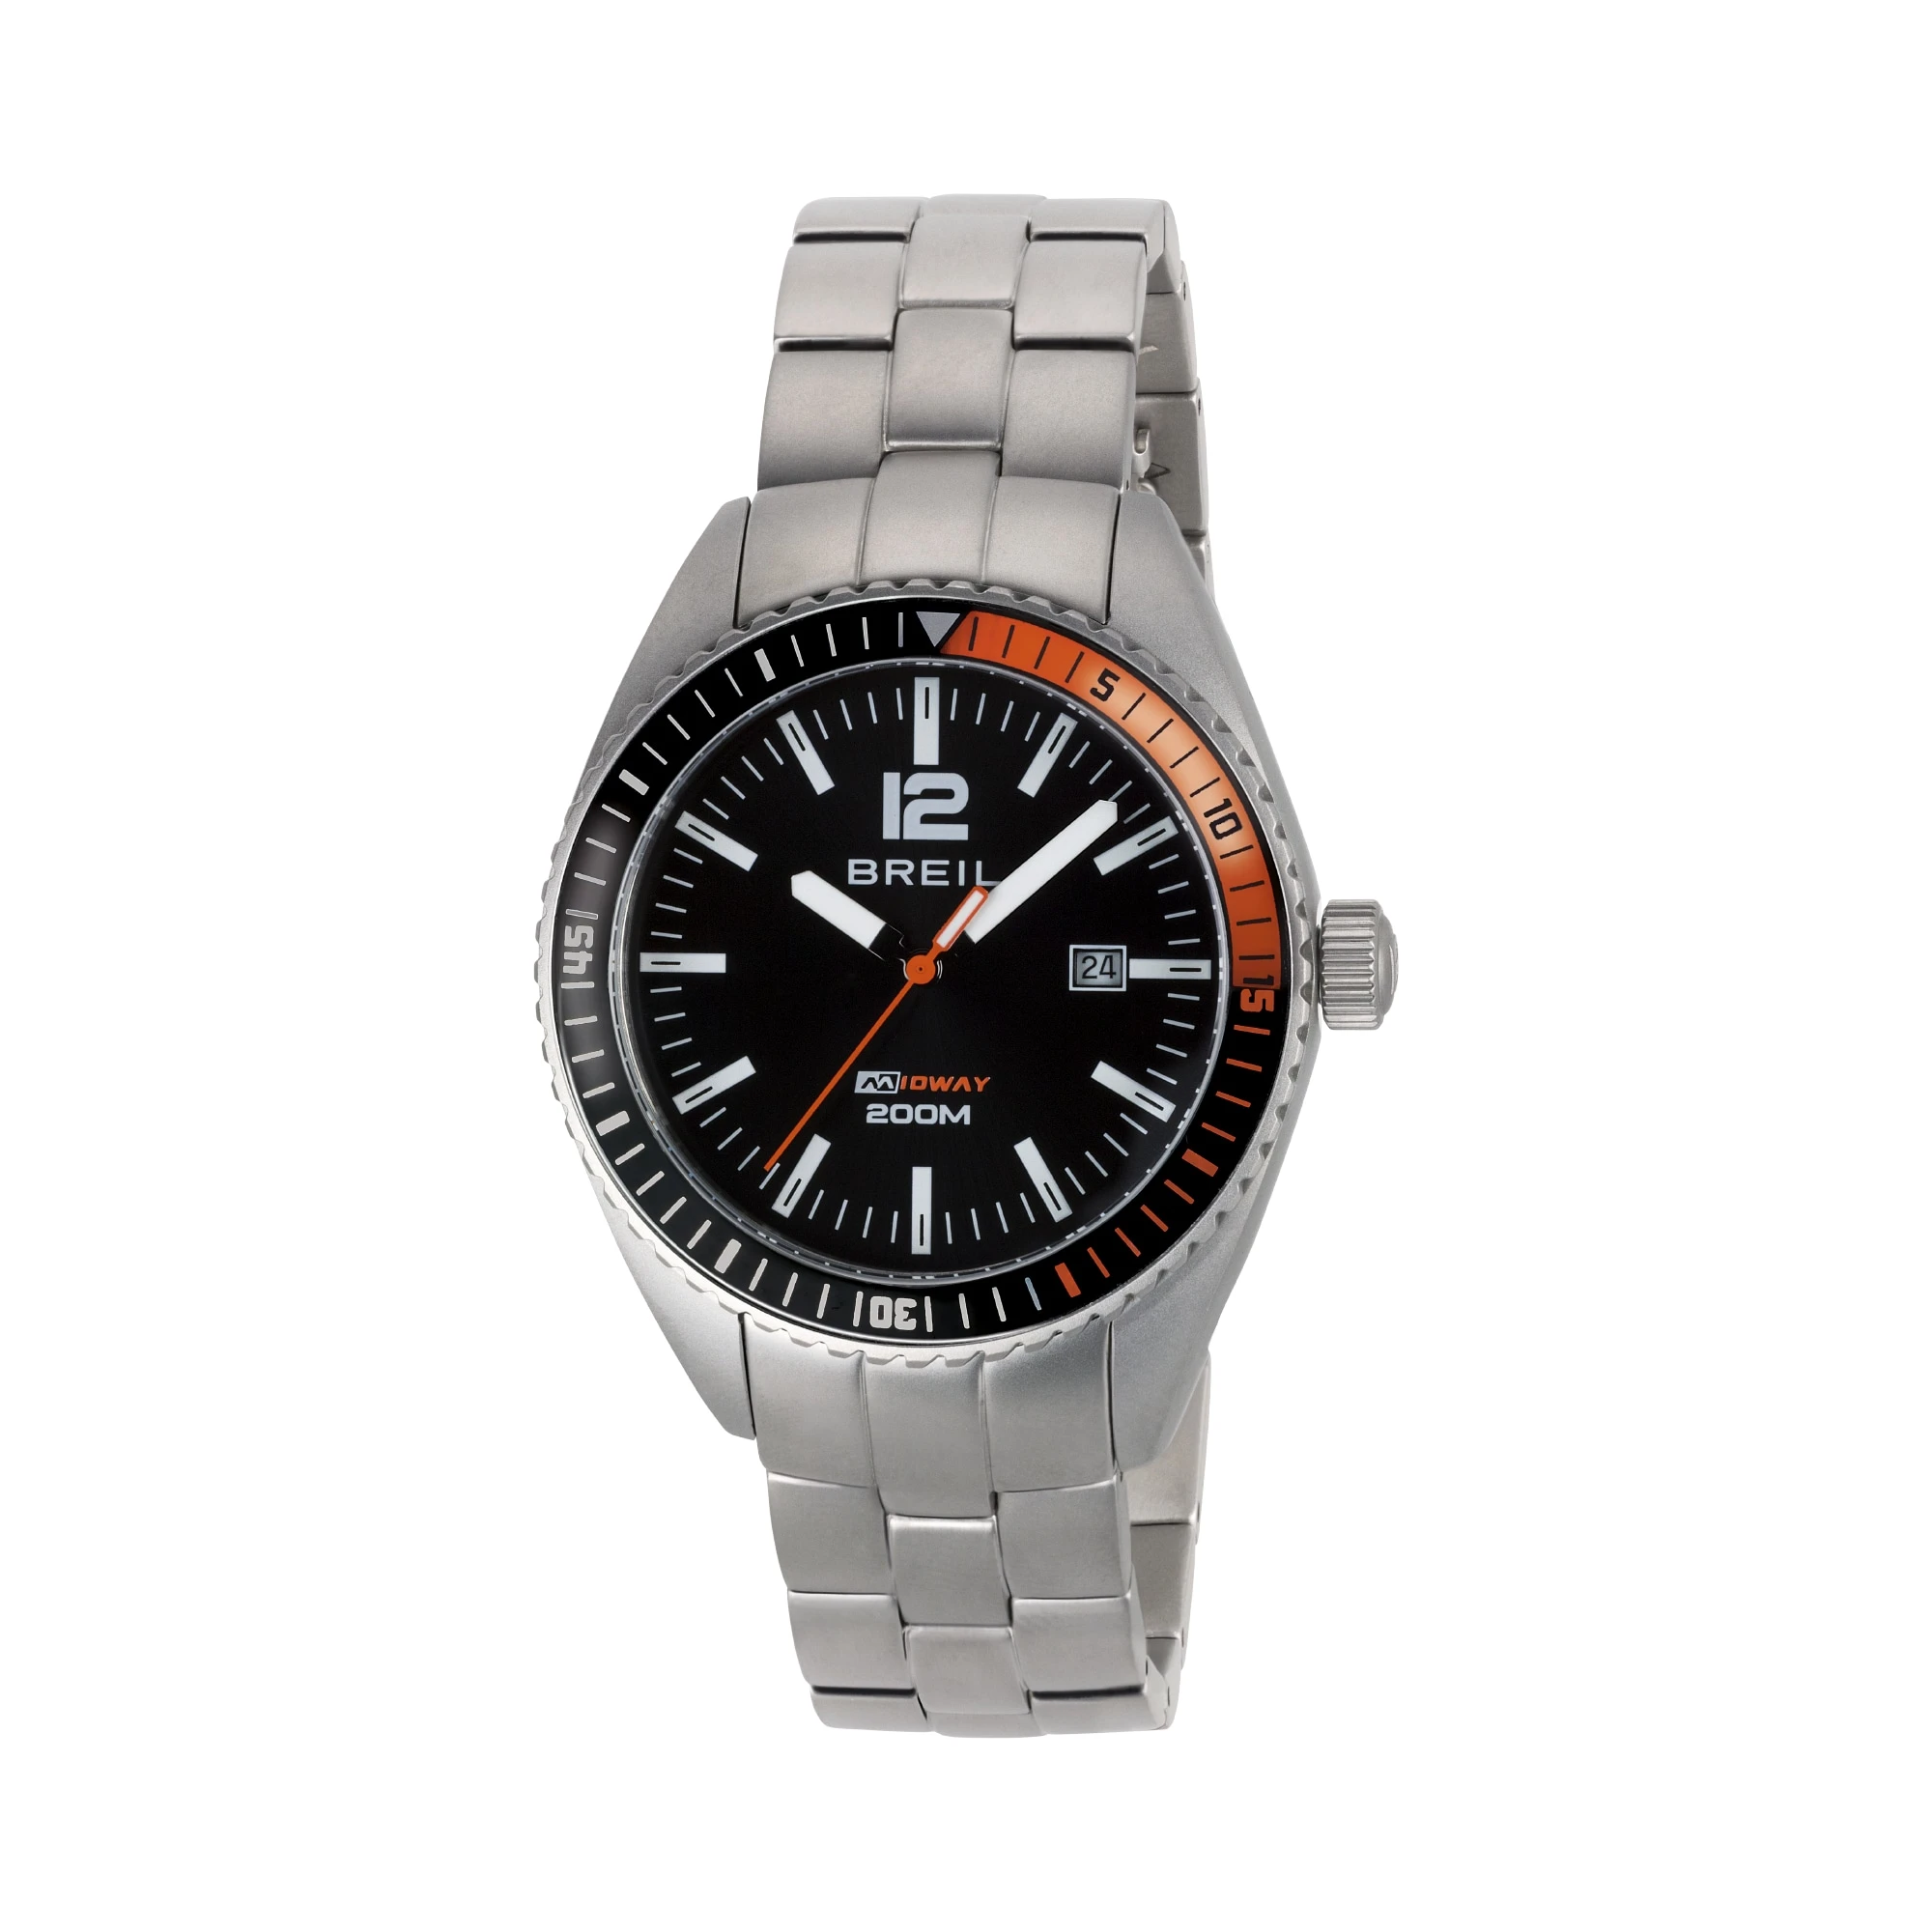 MIDWAY - DIVER TIME ONLY 42 MM - 1 - TW1629 | Breil